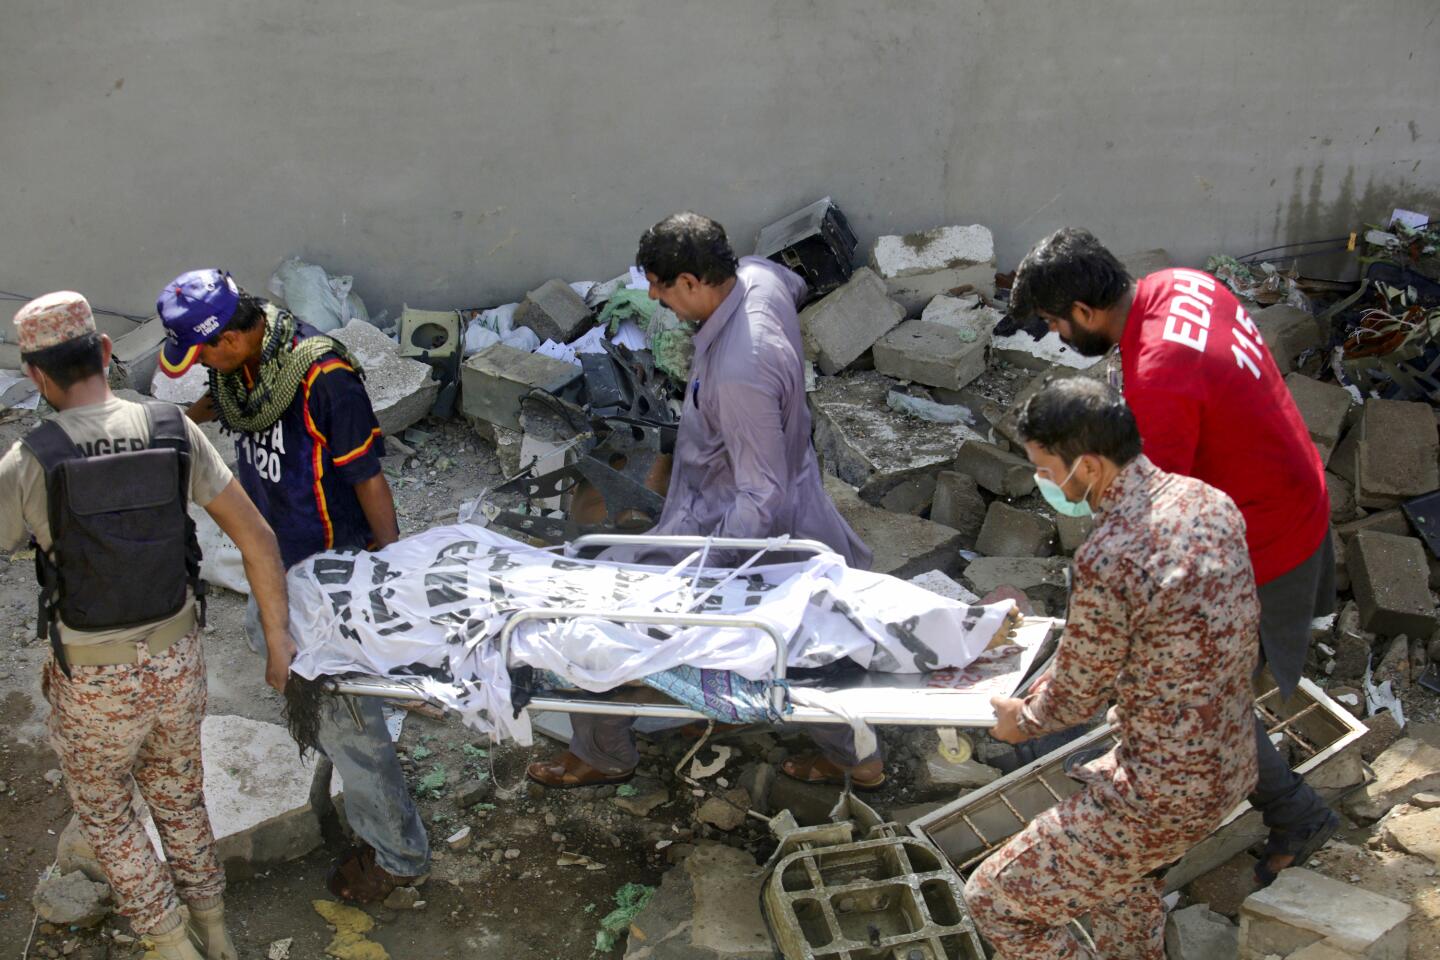 A victim's body is removed from the wreckage of a Pakistani airliner that crashed Friday in a neighborhood in Karachi.